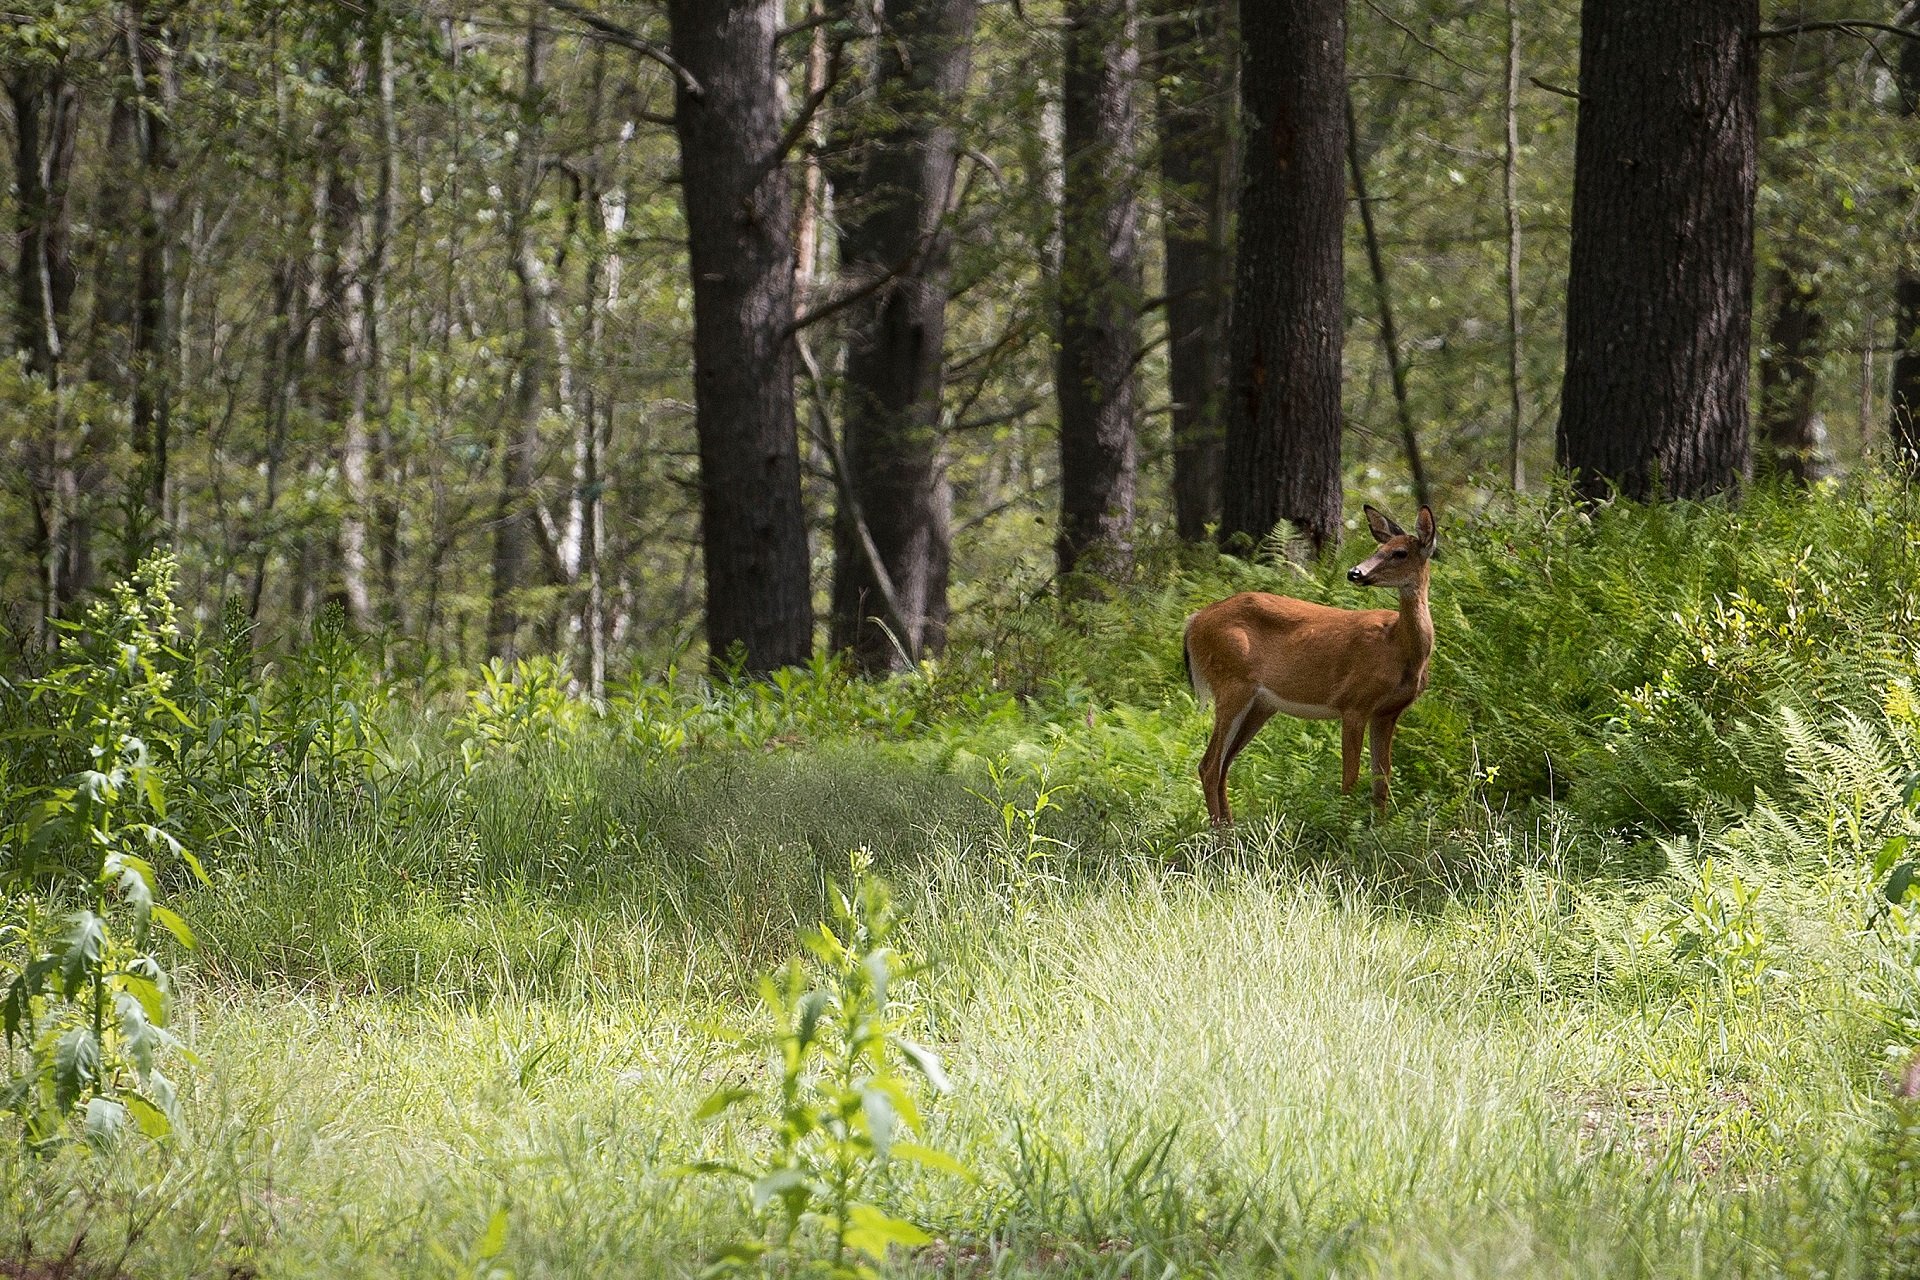 A deer stands amid ferns, grass, and trees on a sunny day.